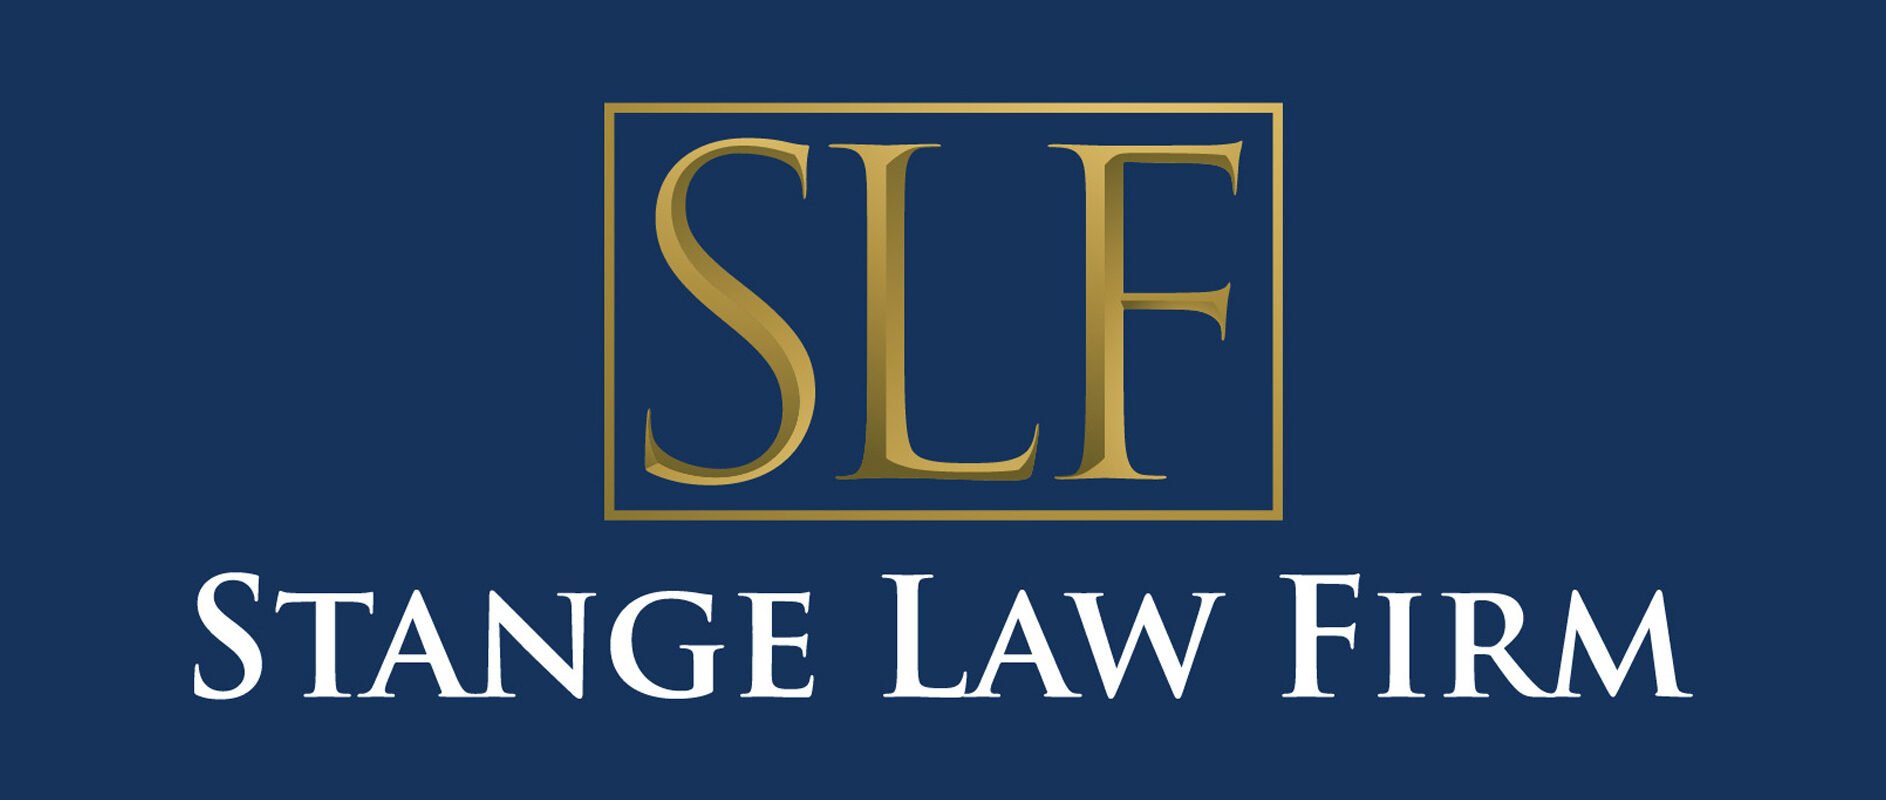 Divorce & Family Law Firm | Multi-State Lawyers | Stange Law Firm